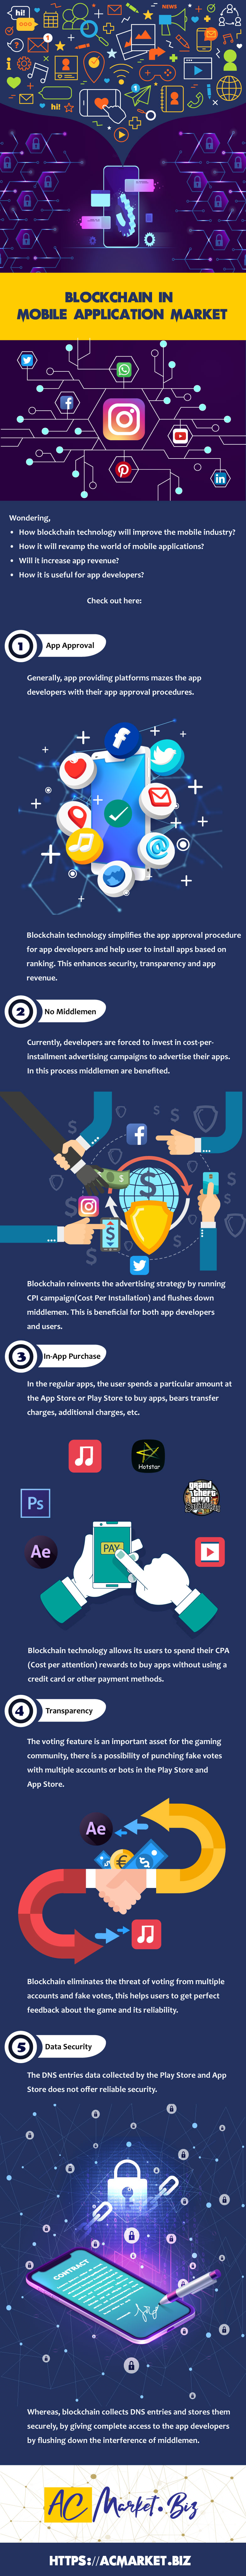 Wondering how blockchain technology will improve the mobile industry? Wondering how blockchain technology will revamp the world of mobile applications? Wondering how blockchain technology is useful for app developers? Blockchain technology simplifies the app approval procedure for app developers and help user to install apps based on ranking. This enhances security, transparency and app revenue. Blockchain technology entertain no middlemen. Currently, app developers are forced to invest in cost-per installment advertising campaigns to advertise their apps. In this process middlemen are benefited. Blockchain reinvents the advertising strategy by running CPI campaign (Cost Per Installation) and flushes down middlemen. This is beneficial for both app developers and users. In the regular apps, the user spends a particular amount at the App Store or Play Store to buy apps, bears transfer charges, additional charges, etc. Blockchain technology allows its users to spend their CPA (Cost per attention) rewards to buy apps without using a credit card or other payment methods. The voting feature is an important asset for the gaming community, there is a possibility of punching fake votes with multiple accounts or bots in the Play Store and App Store. Blockchain eliminates the threat of voting from multiple accounts and fake votes, this helps users to get perfect feedback about the game and its reliability. The DNS entries data collected by the Play Store and App Store does not offer reliable security. Whereas, blockchain collects DNS entries and stores them securely, by giving complete access to the app developers by flushing down the interference of middlemen.